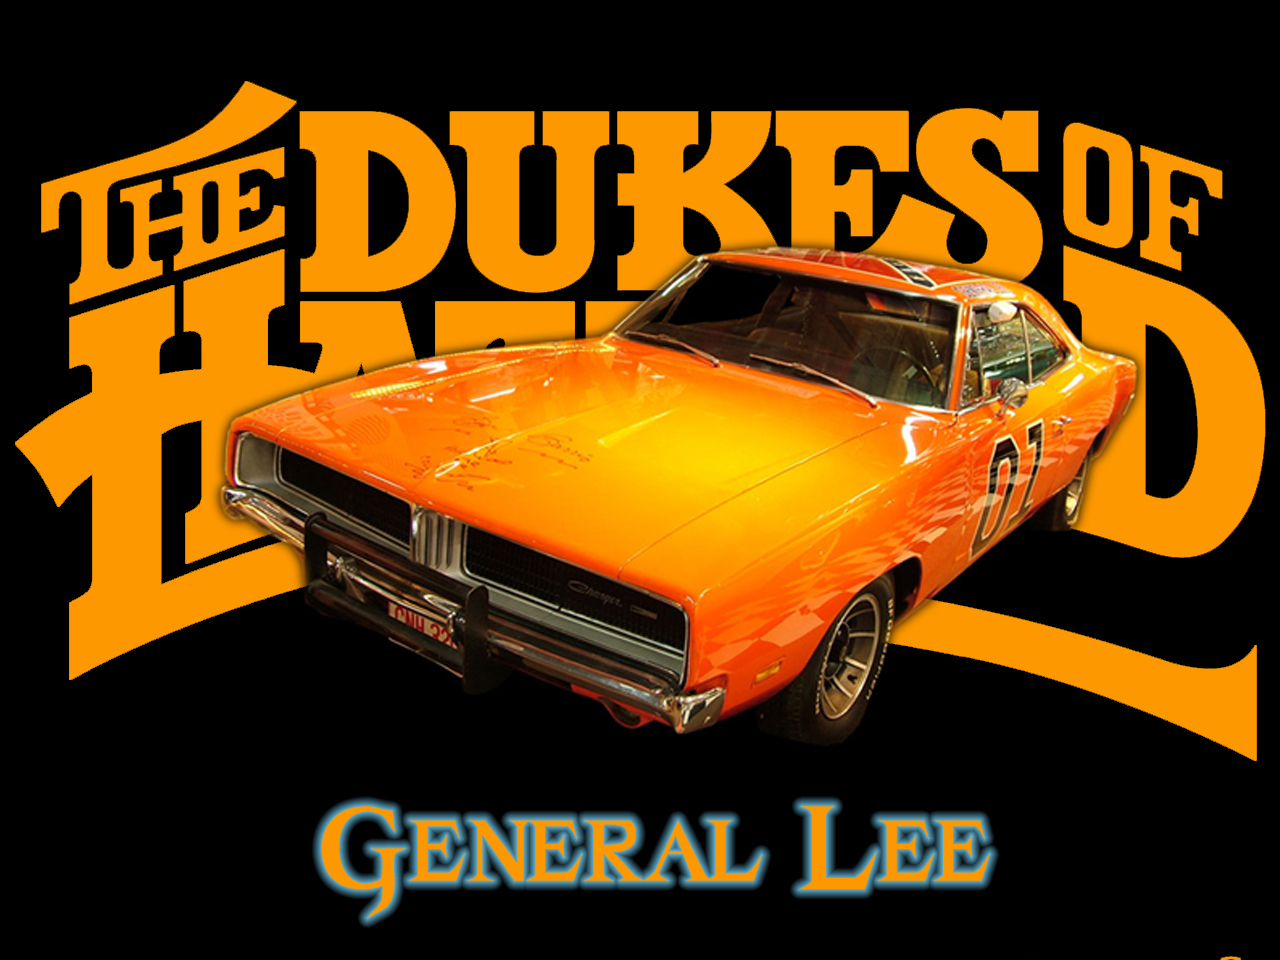 Dukes Of Hazzard General Lee Wallpaper Image Amp Pictures